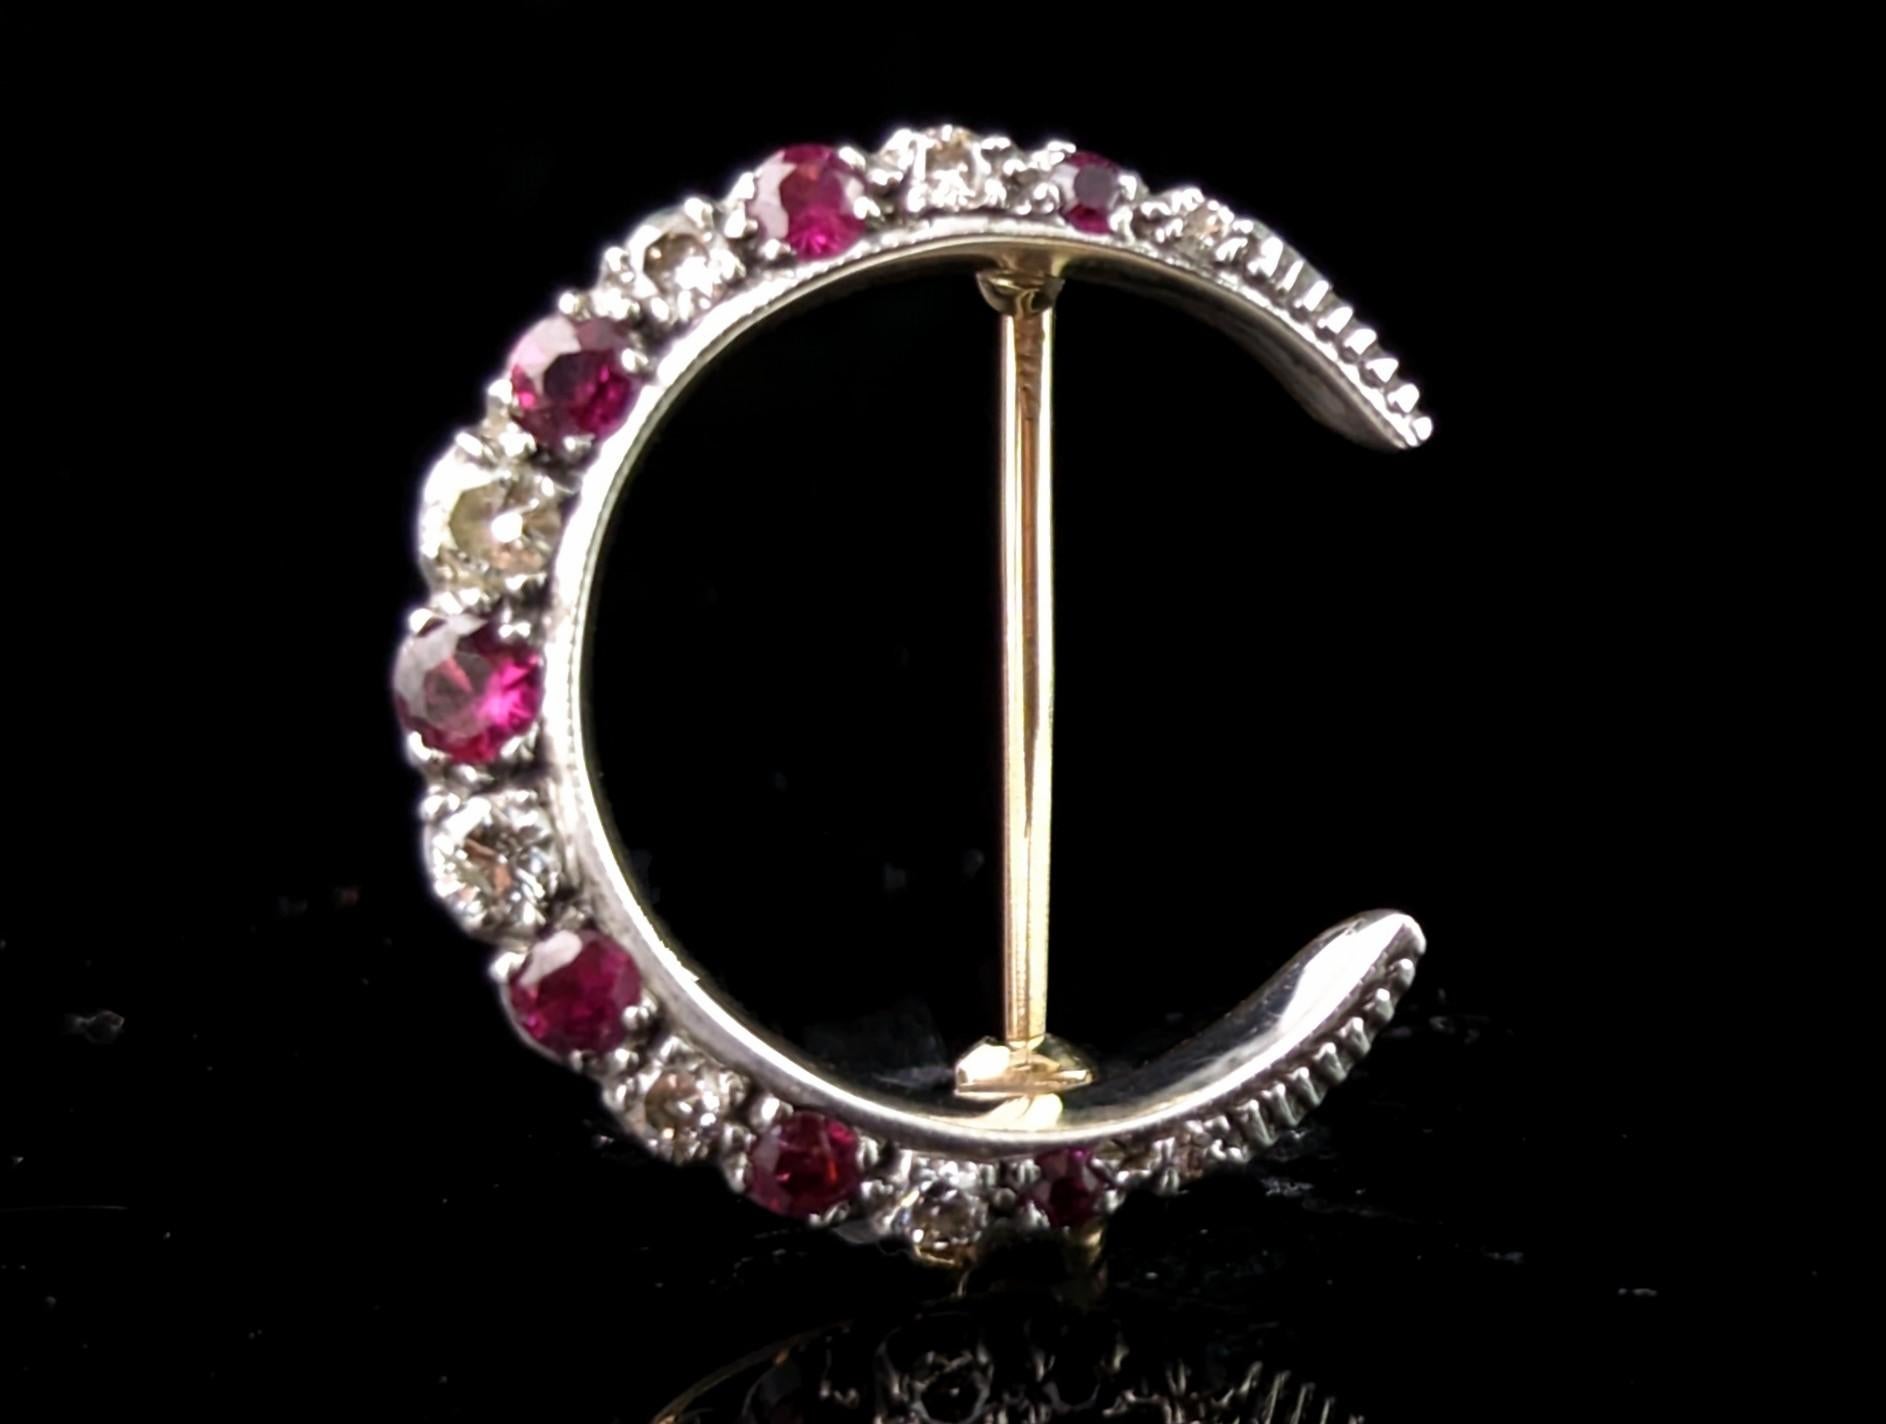 Ahh the antique Crescent moon brooch, such a revered and sought after jewel, both today and in the past.

Not only are celestial pieces considered some of the most beautiful in the world they are also full of symbolism.

This beauty is made from 9ct